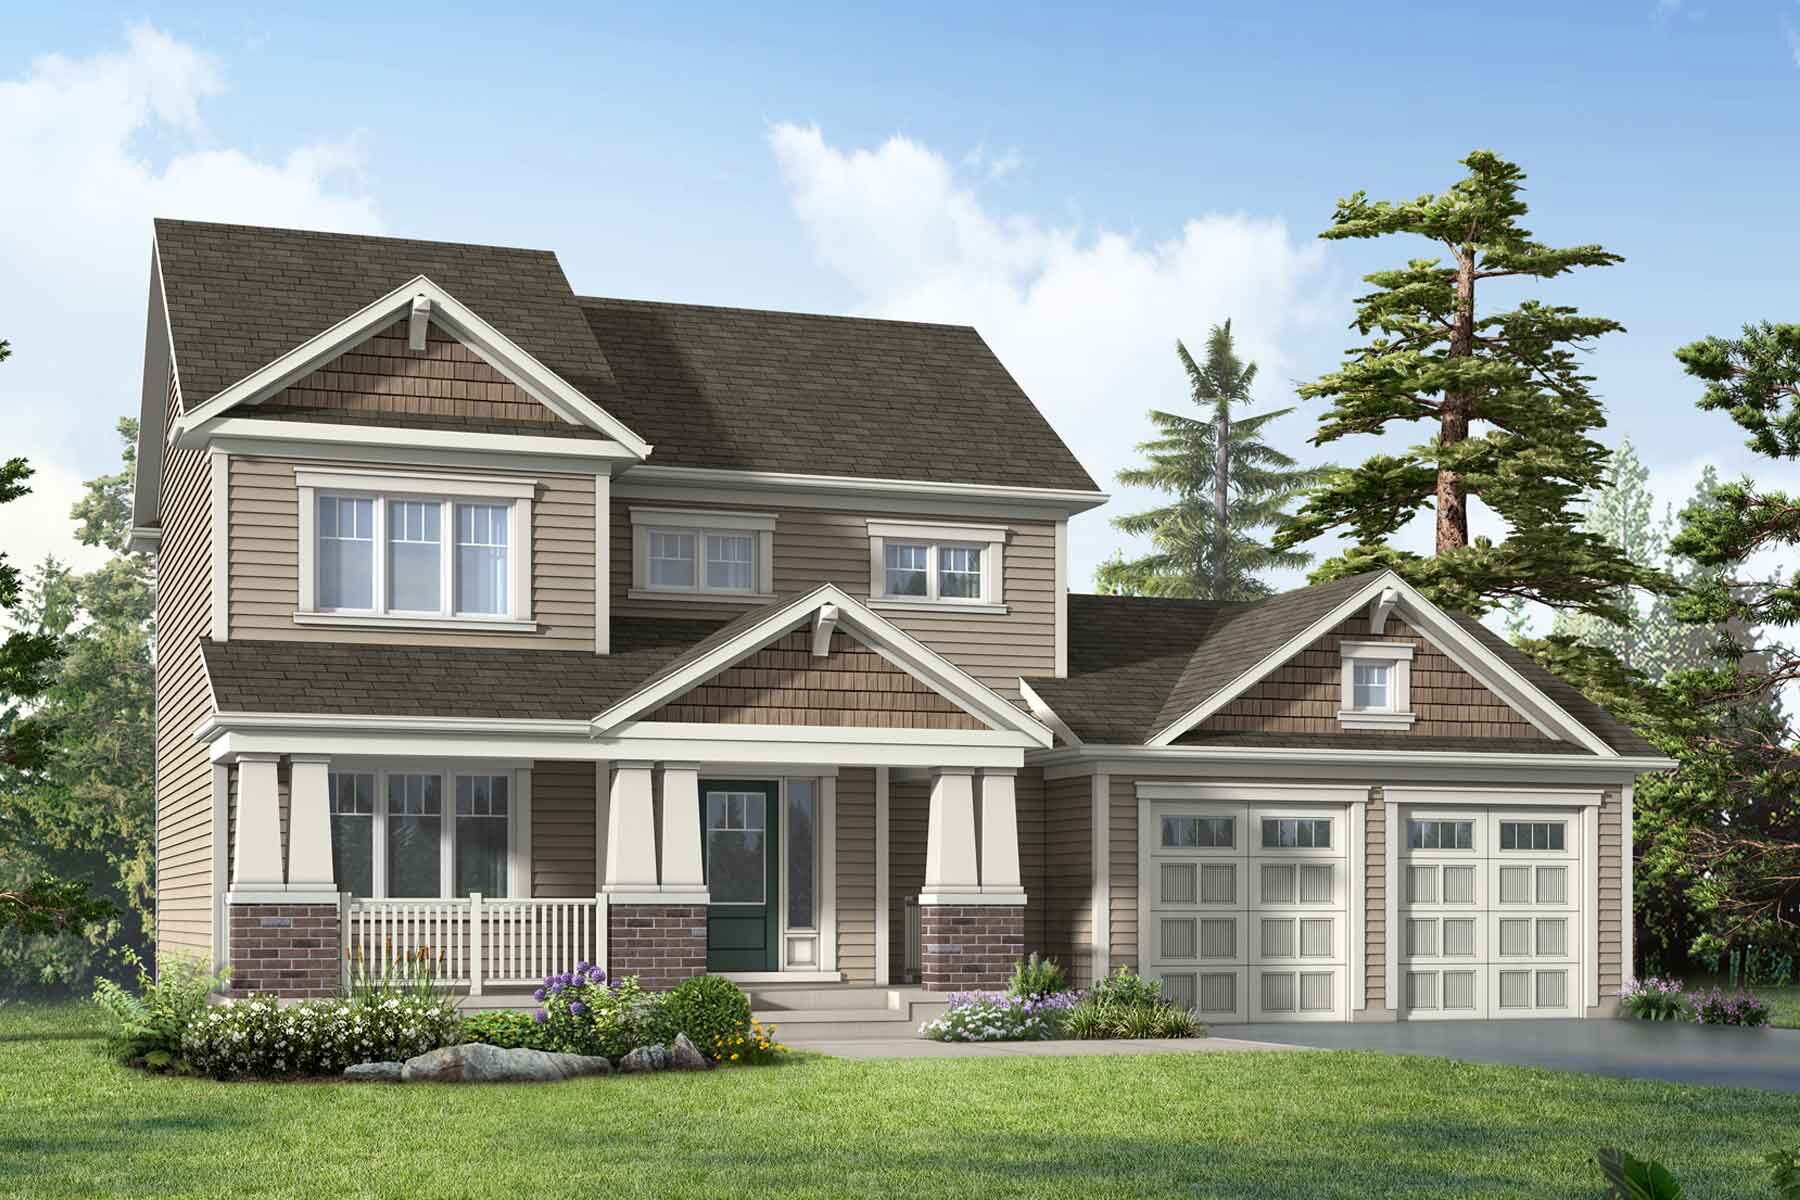 A craftsman style elevation with a double car garage and a covered porch area.